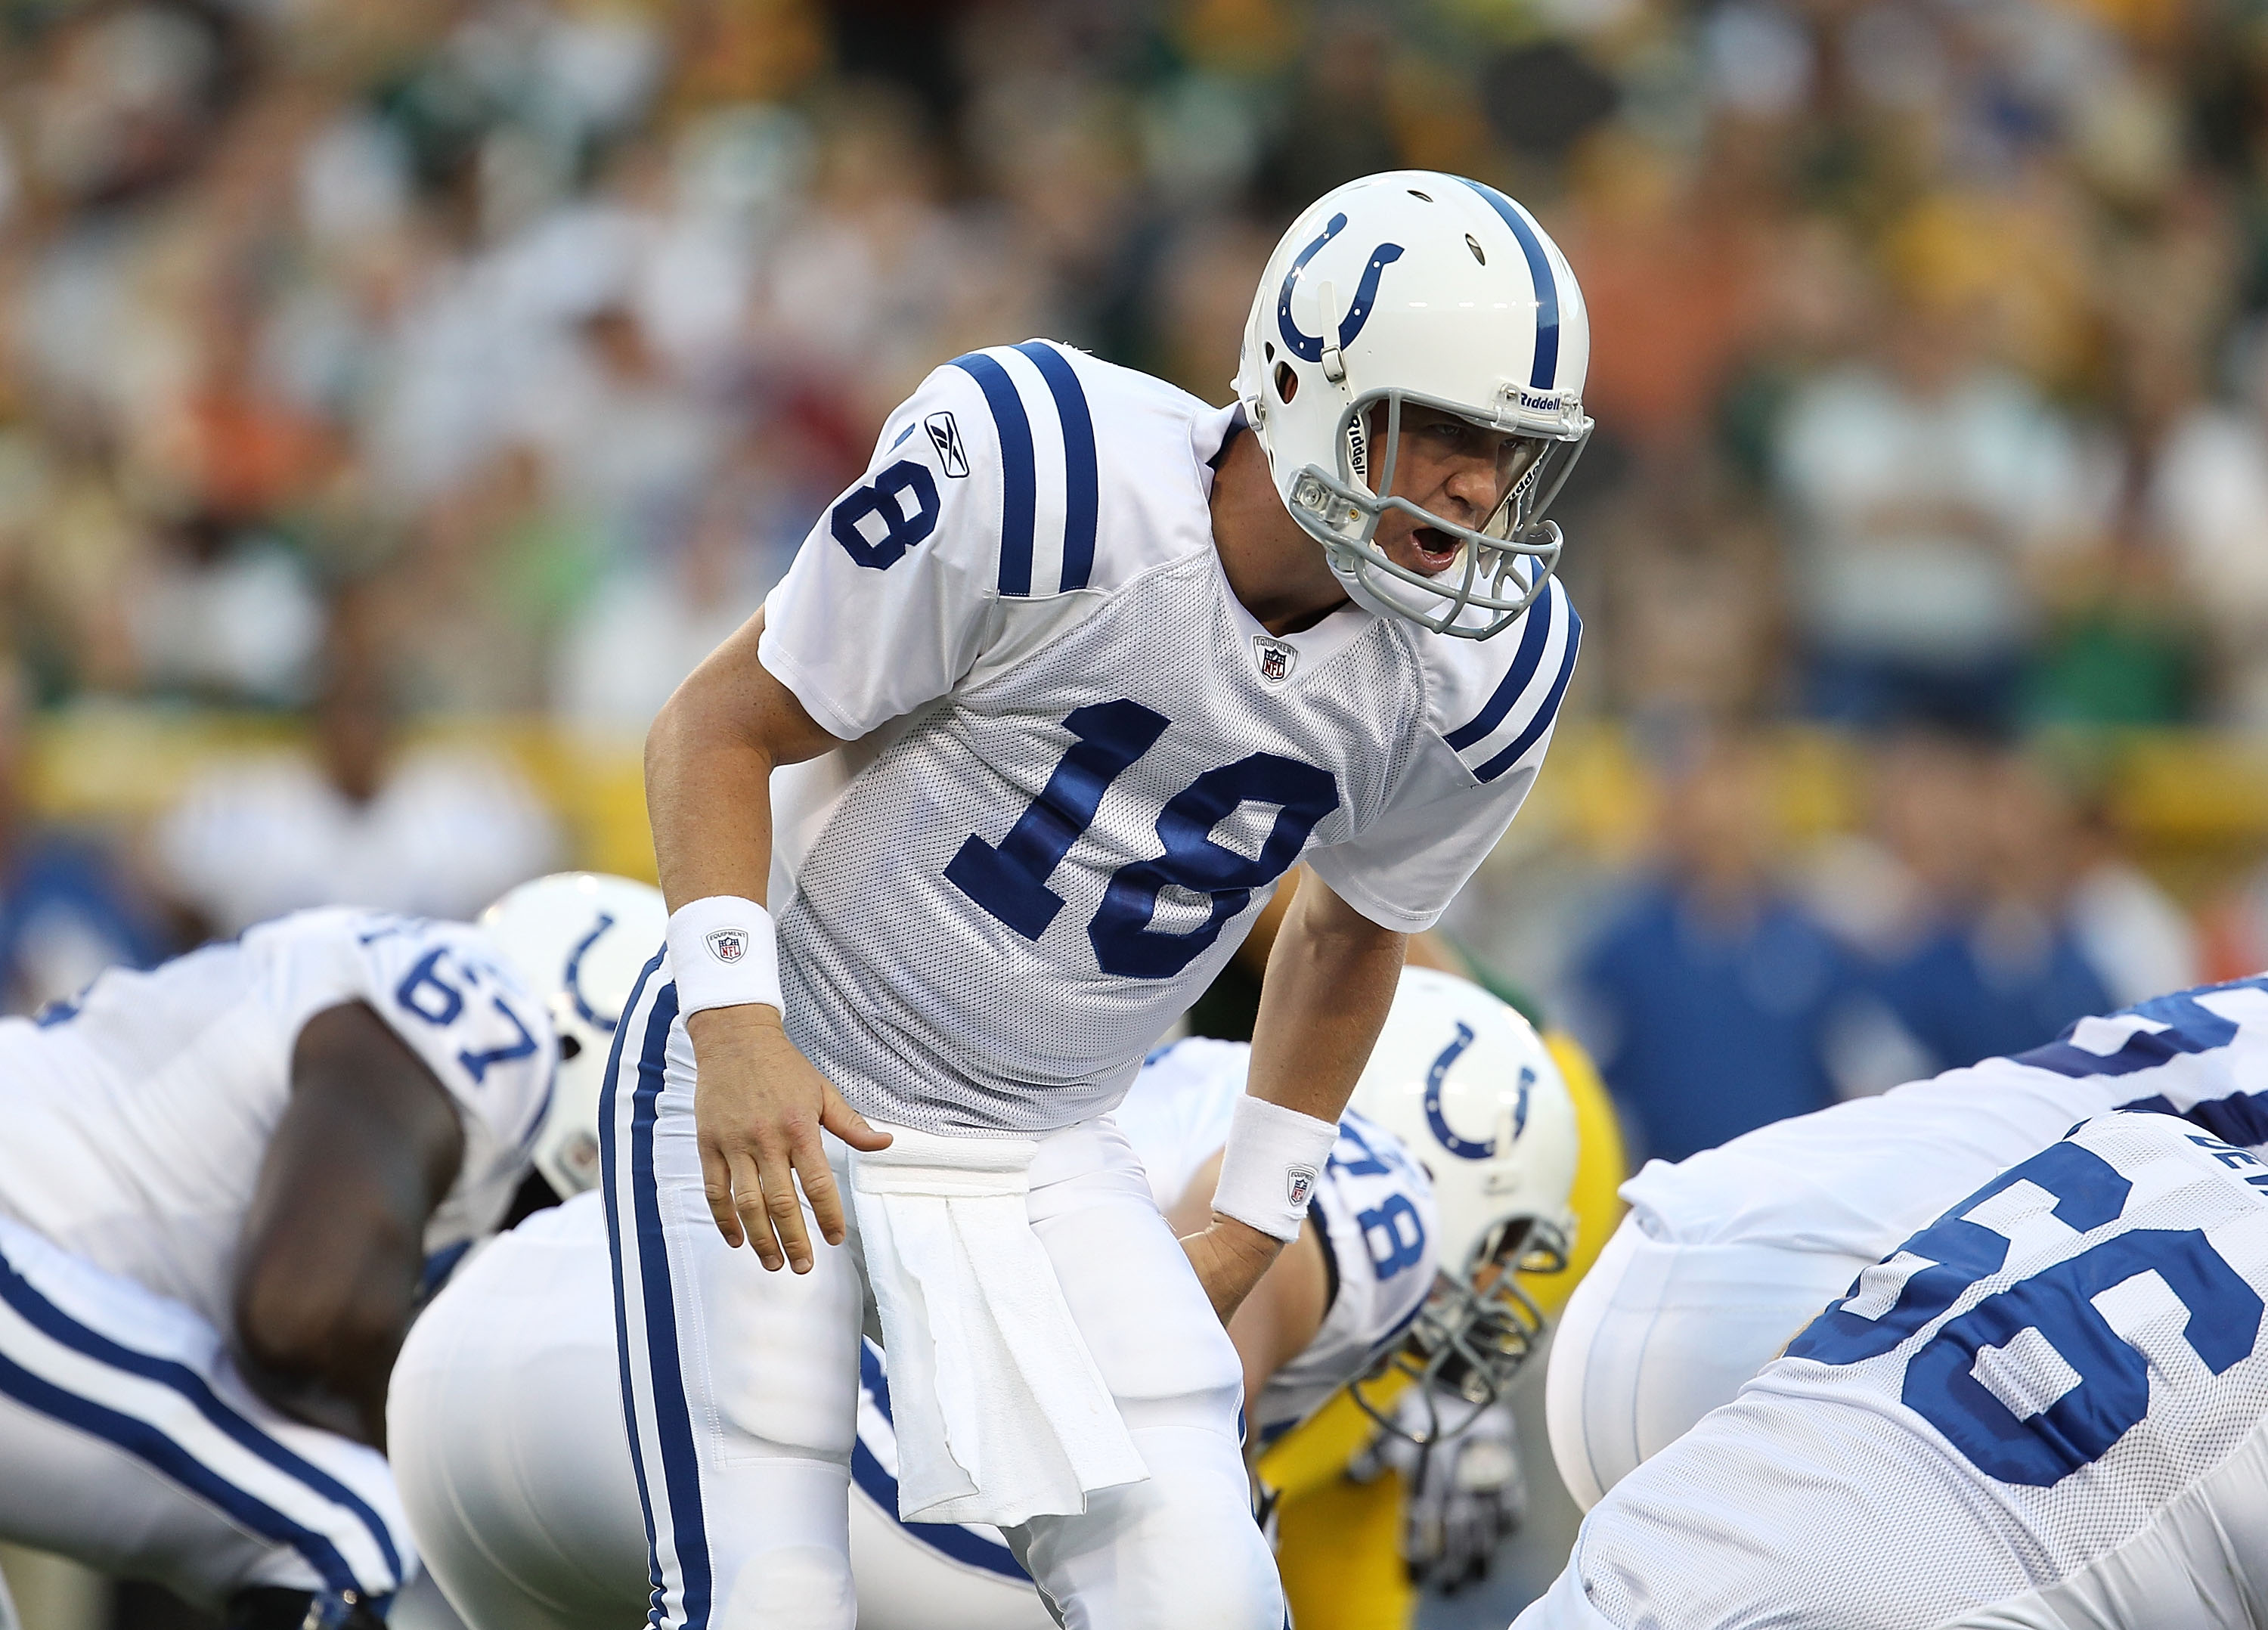 GREEN BAY, WI - AUGUST 26: Peyton Manning #18 of the Indianapolis Colts calls a play during a preseason game against the Green Bay Packers at Lambeau Field on August 26, 2010 in Green Bay, Wisconsin. The Packers defeated the Colts 59-24.  (Photo by Jonath